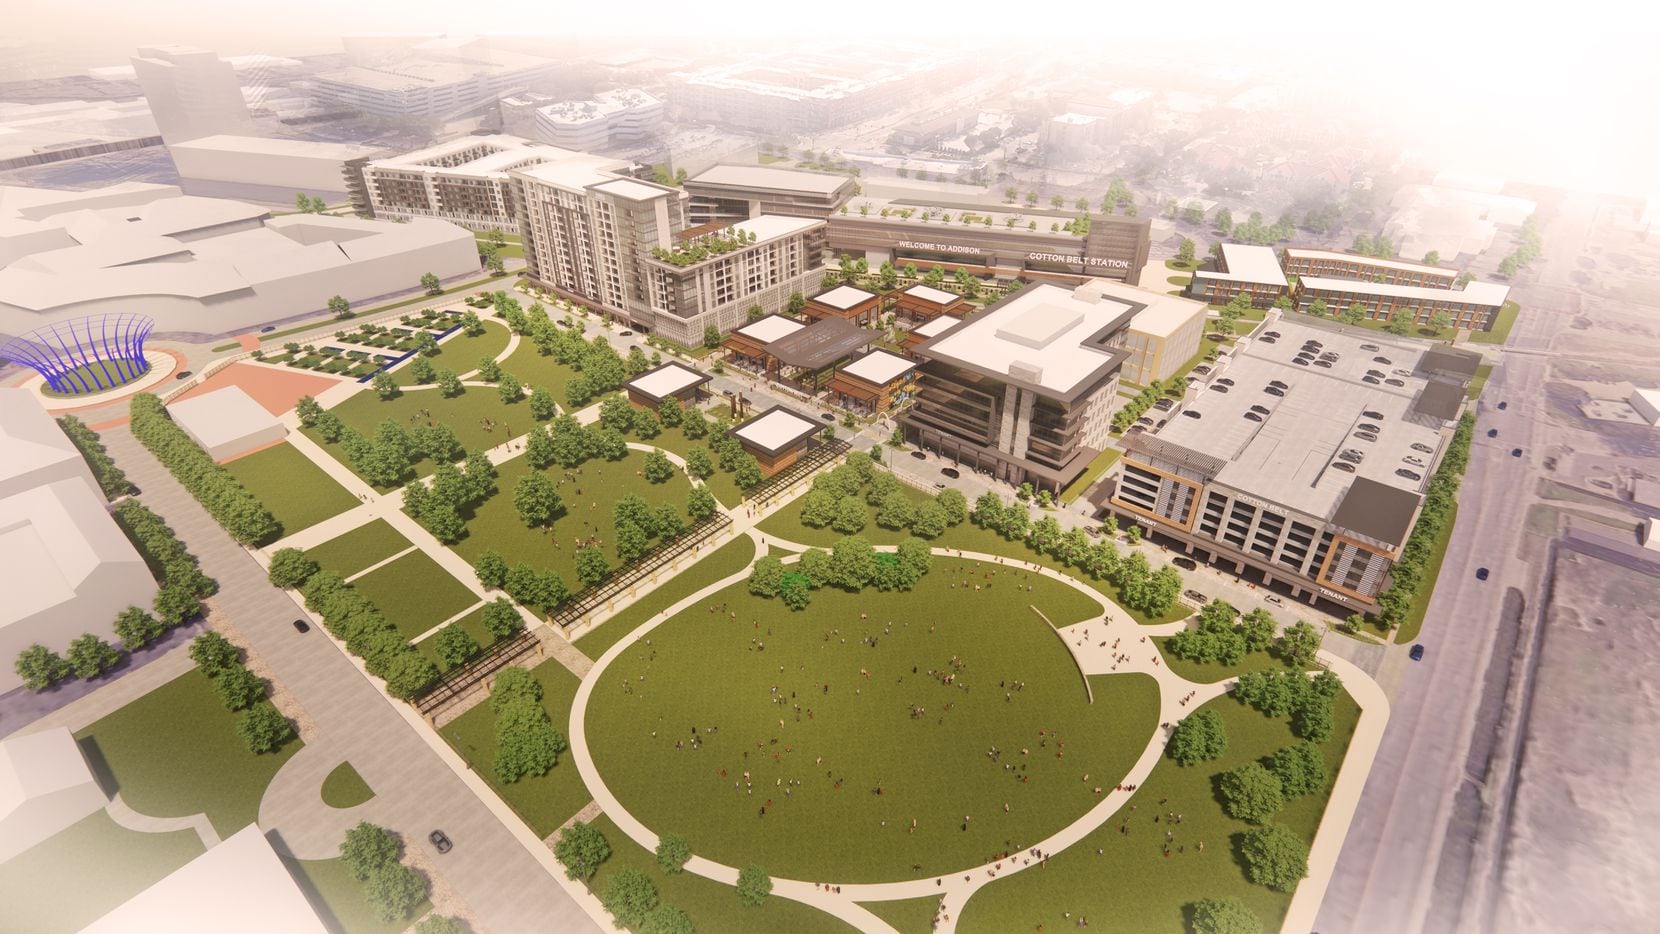 The new buildings will overlook Addison’s Circle Park, a 10-acre public green space used for...